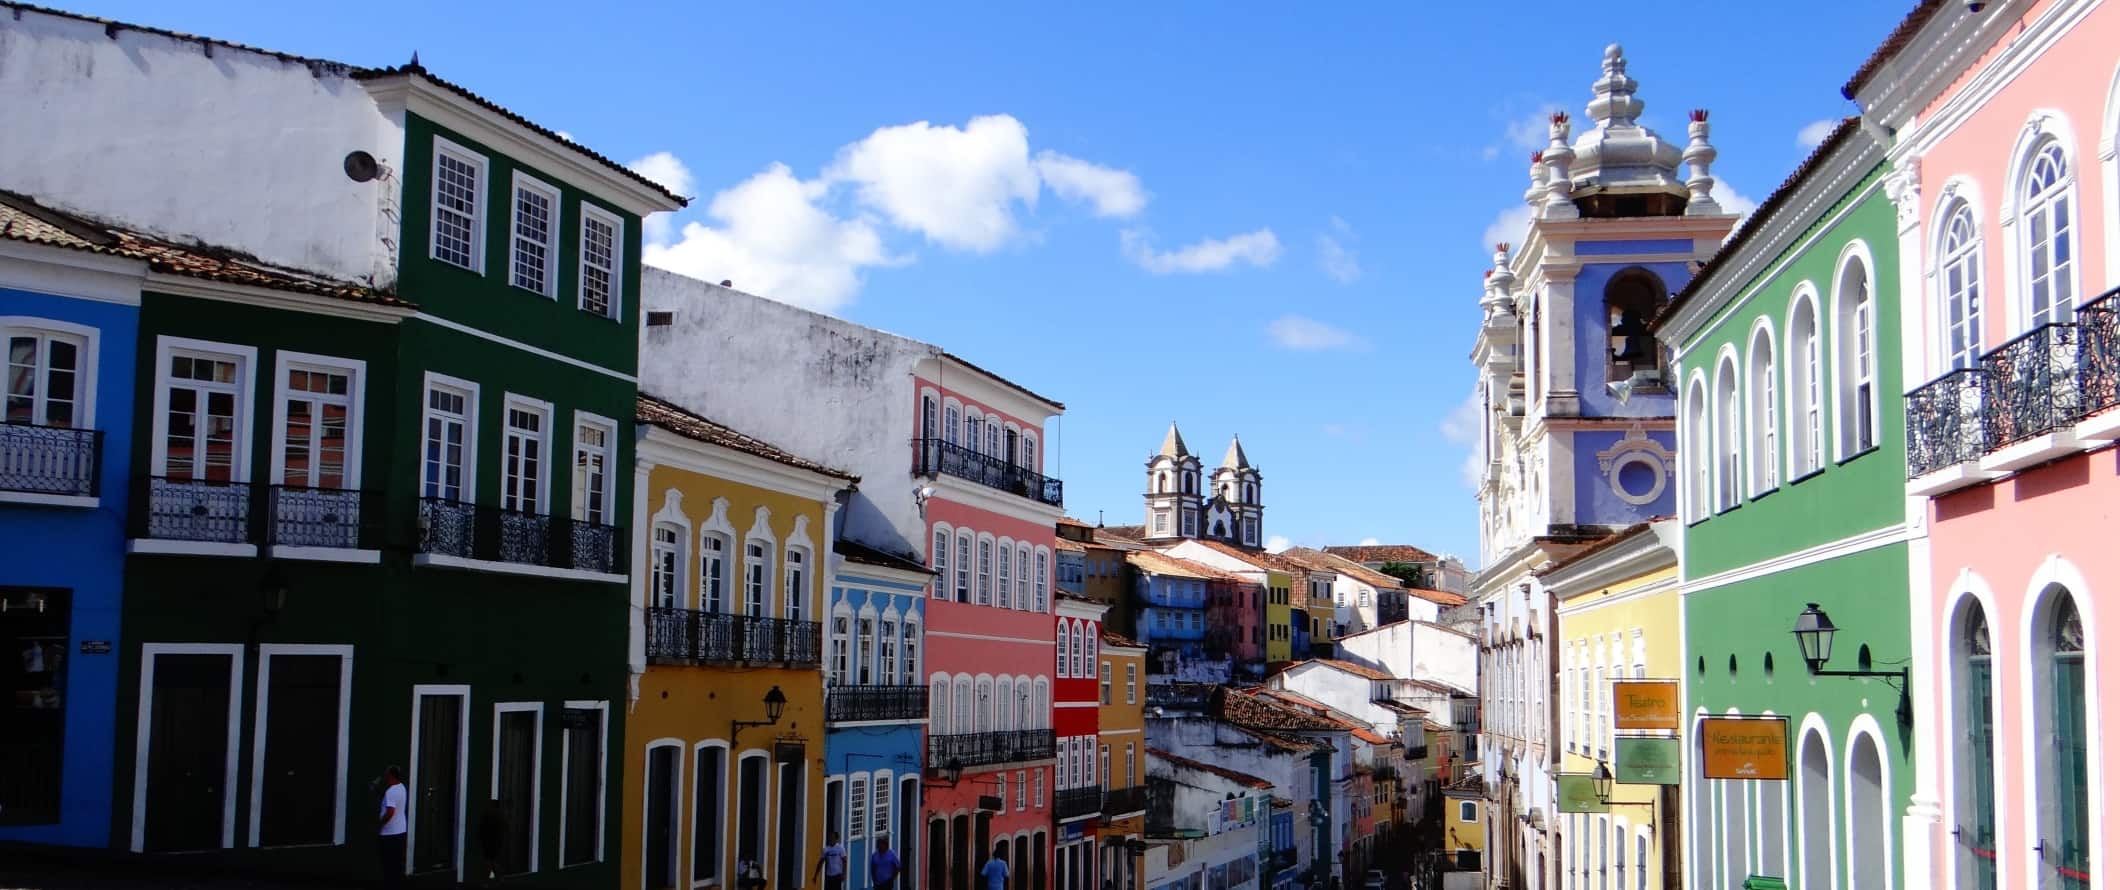 A street lined with brightly colored historic buildings in the city of Salvador, Brazil